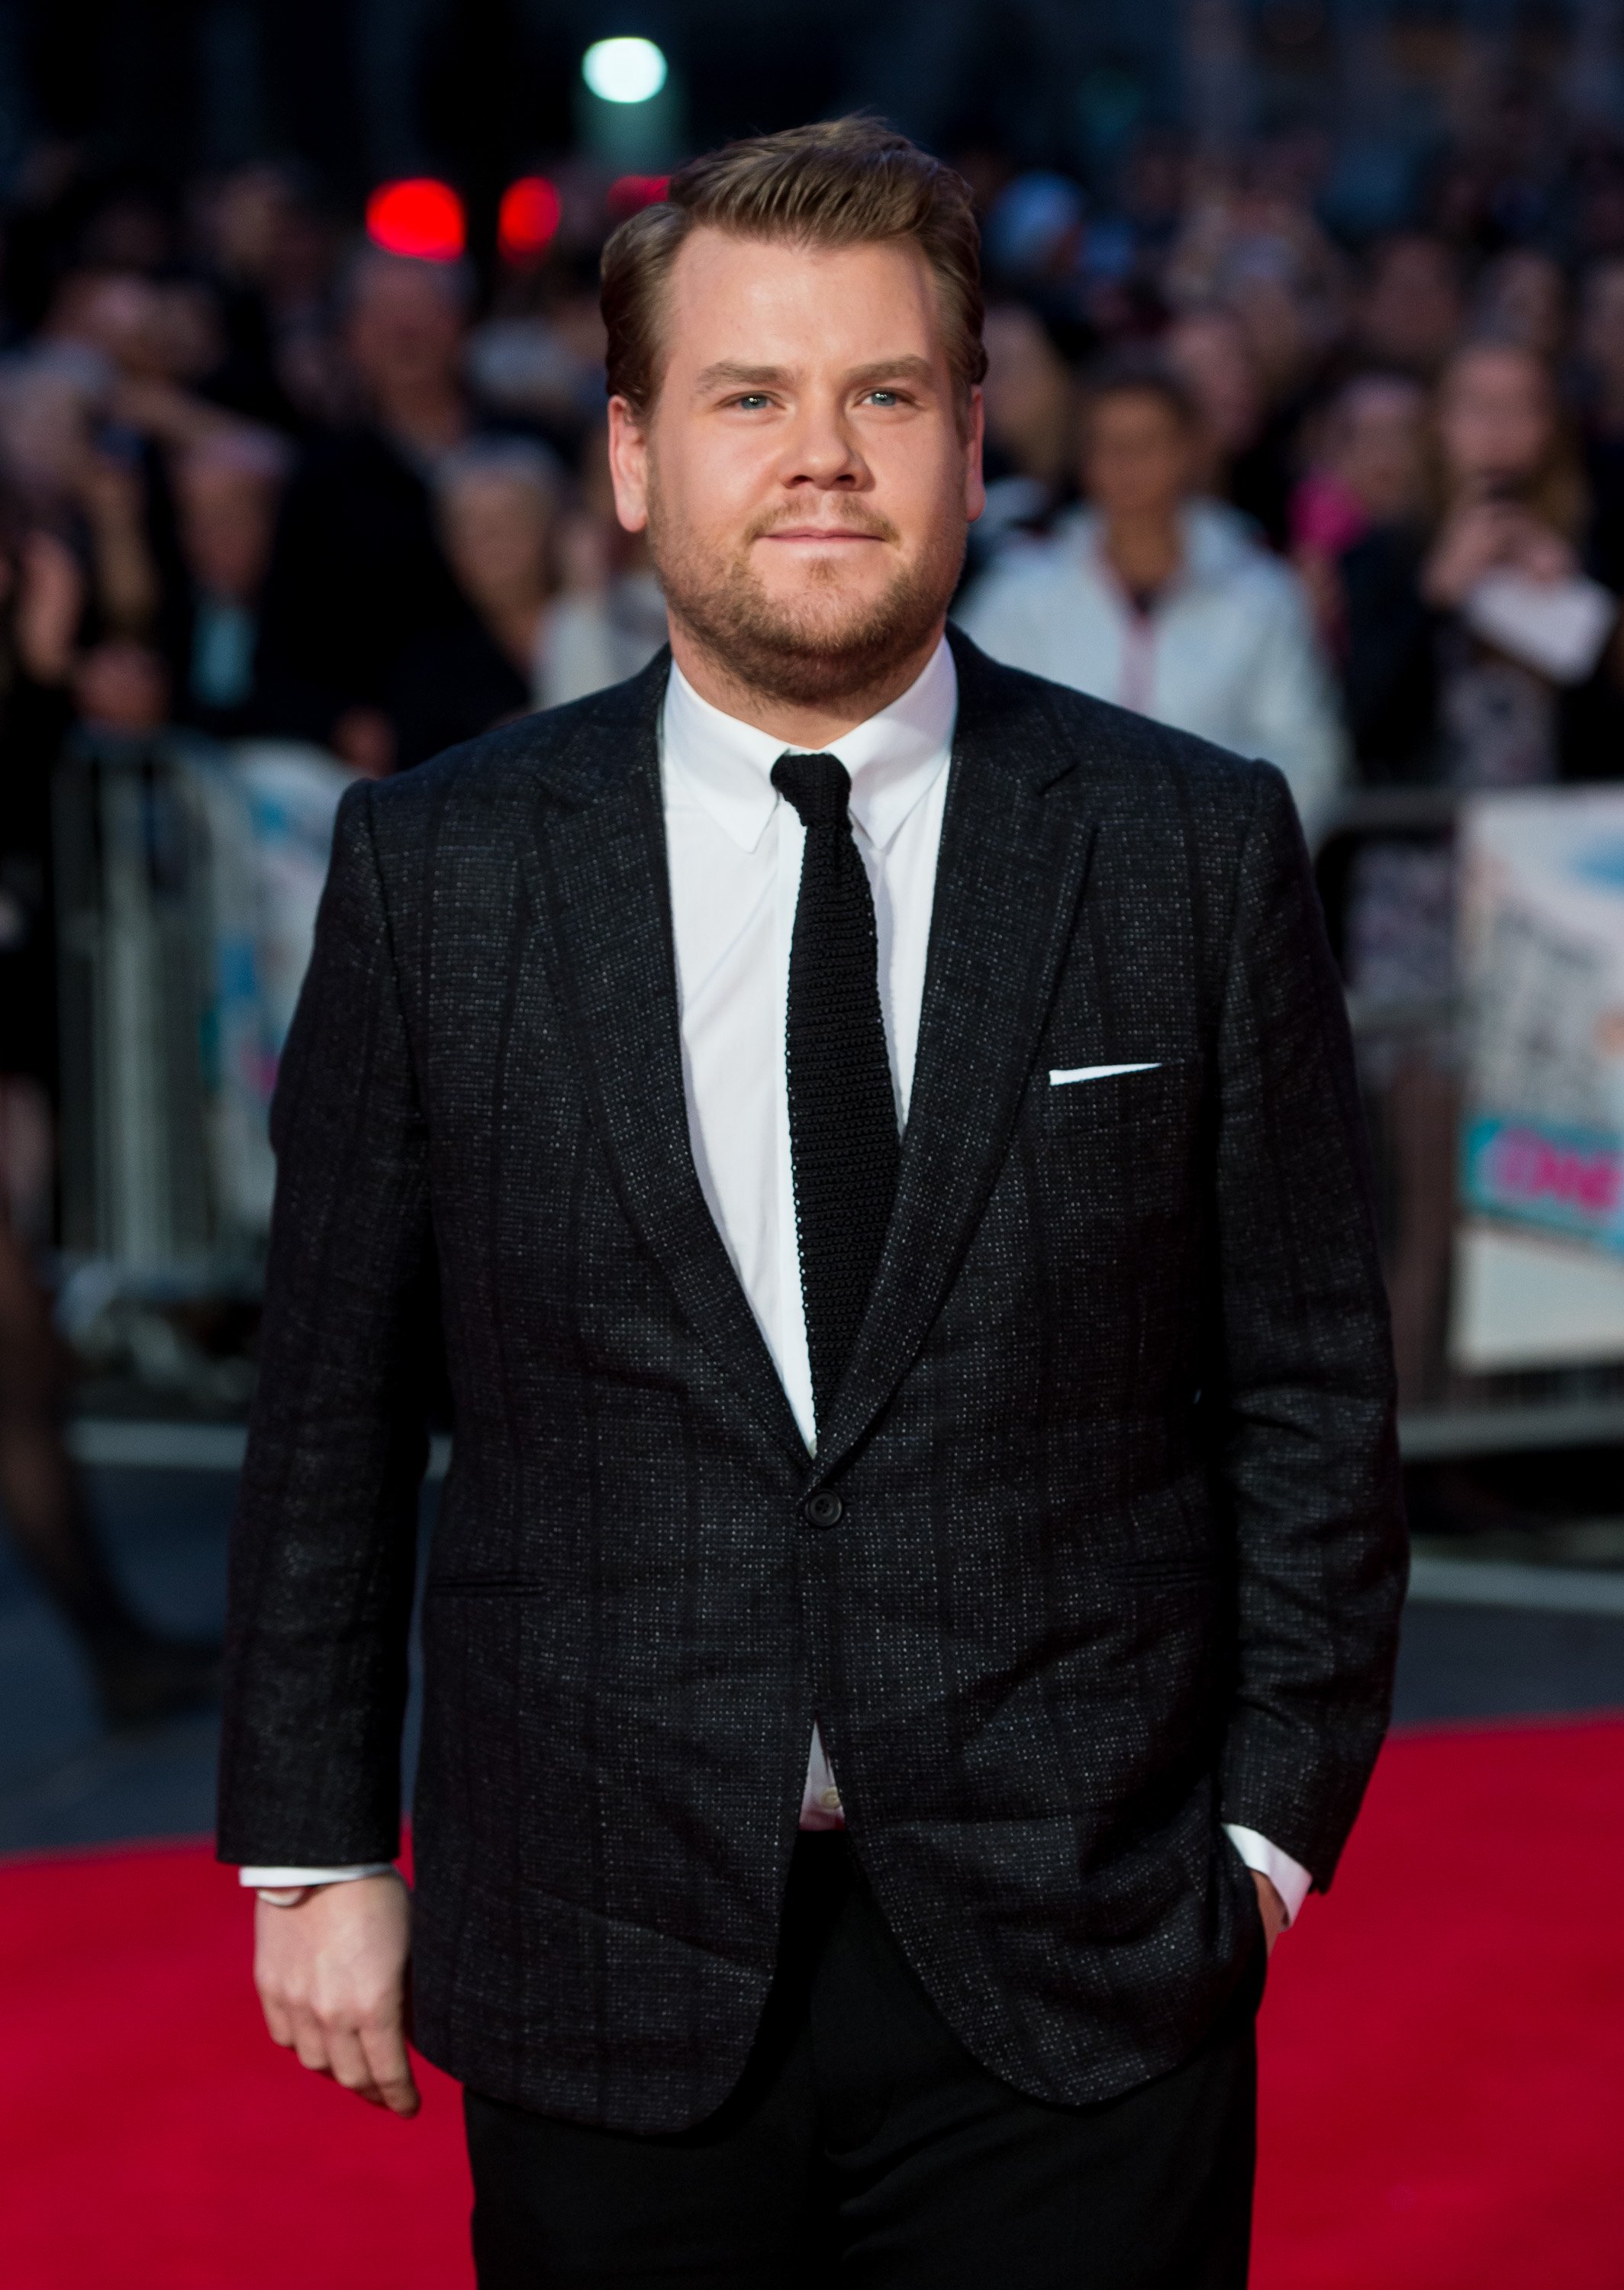 James Corden attends the premiere of "One Chance" in London, England on October 17, 2013 | Photo: Getty Images